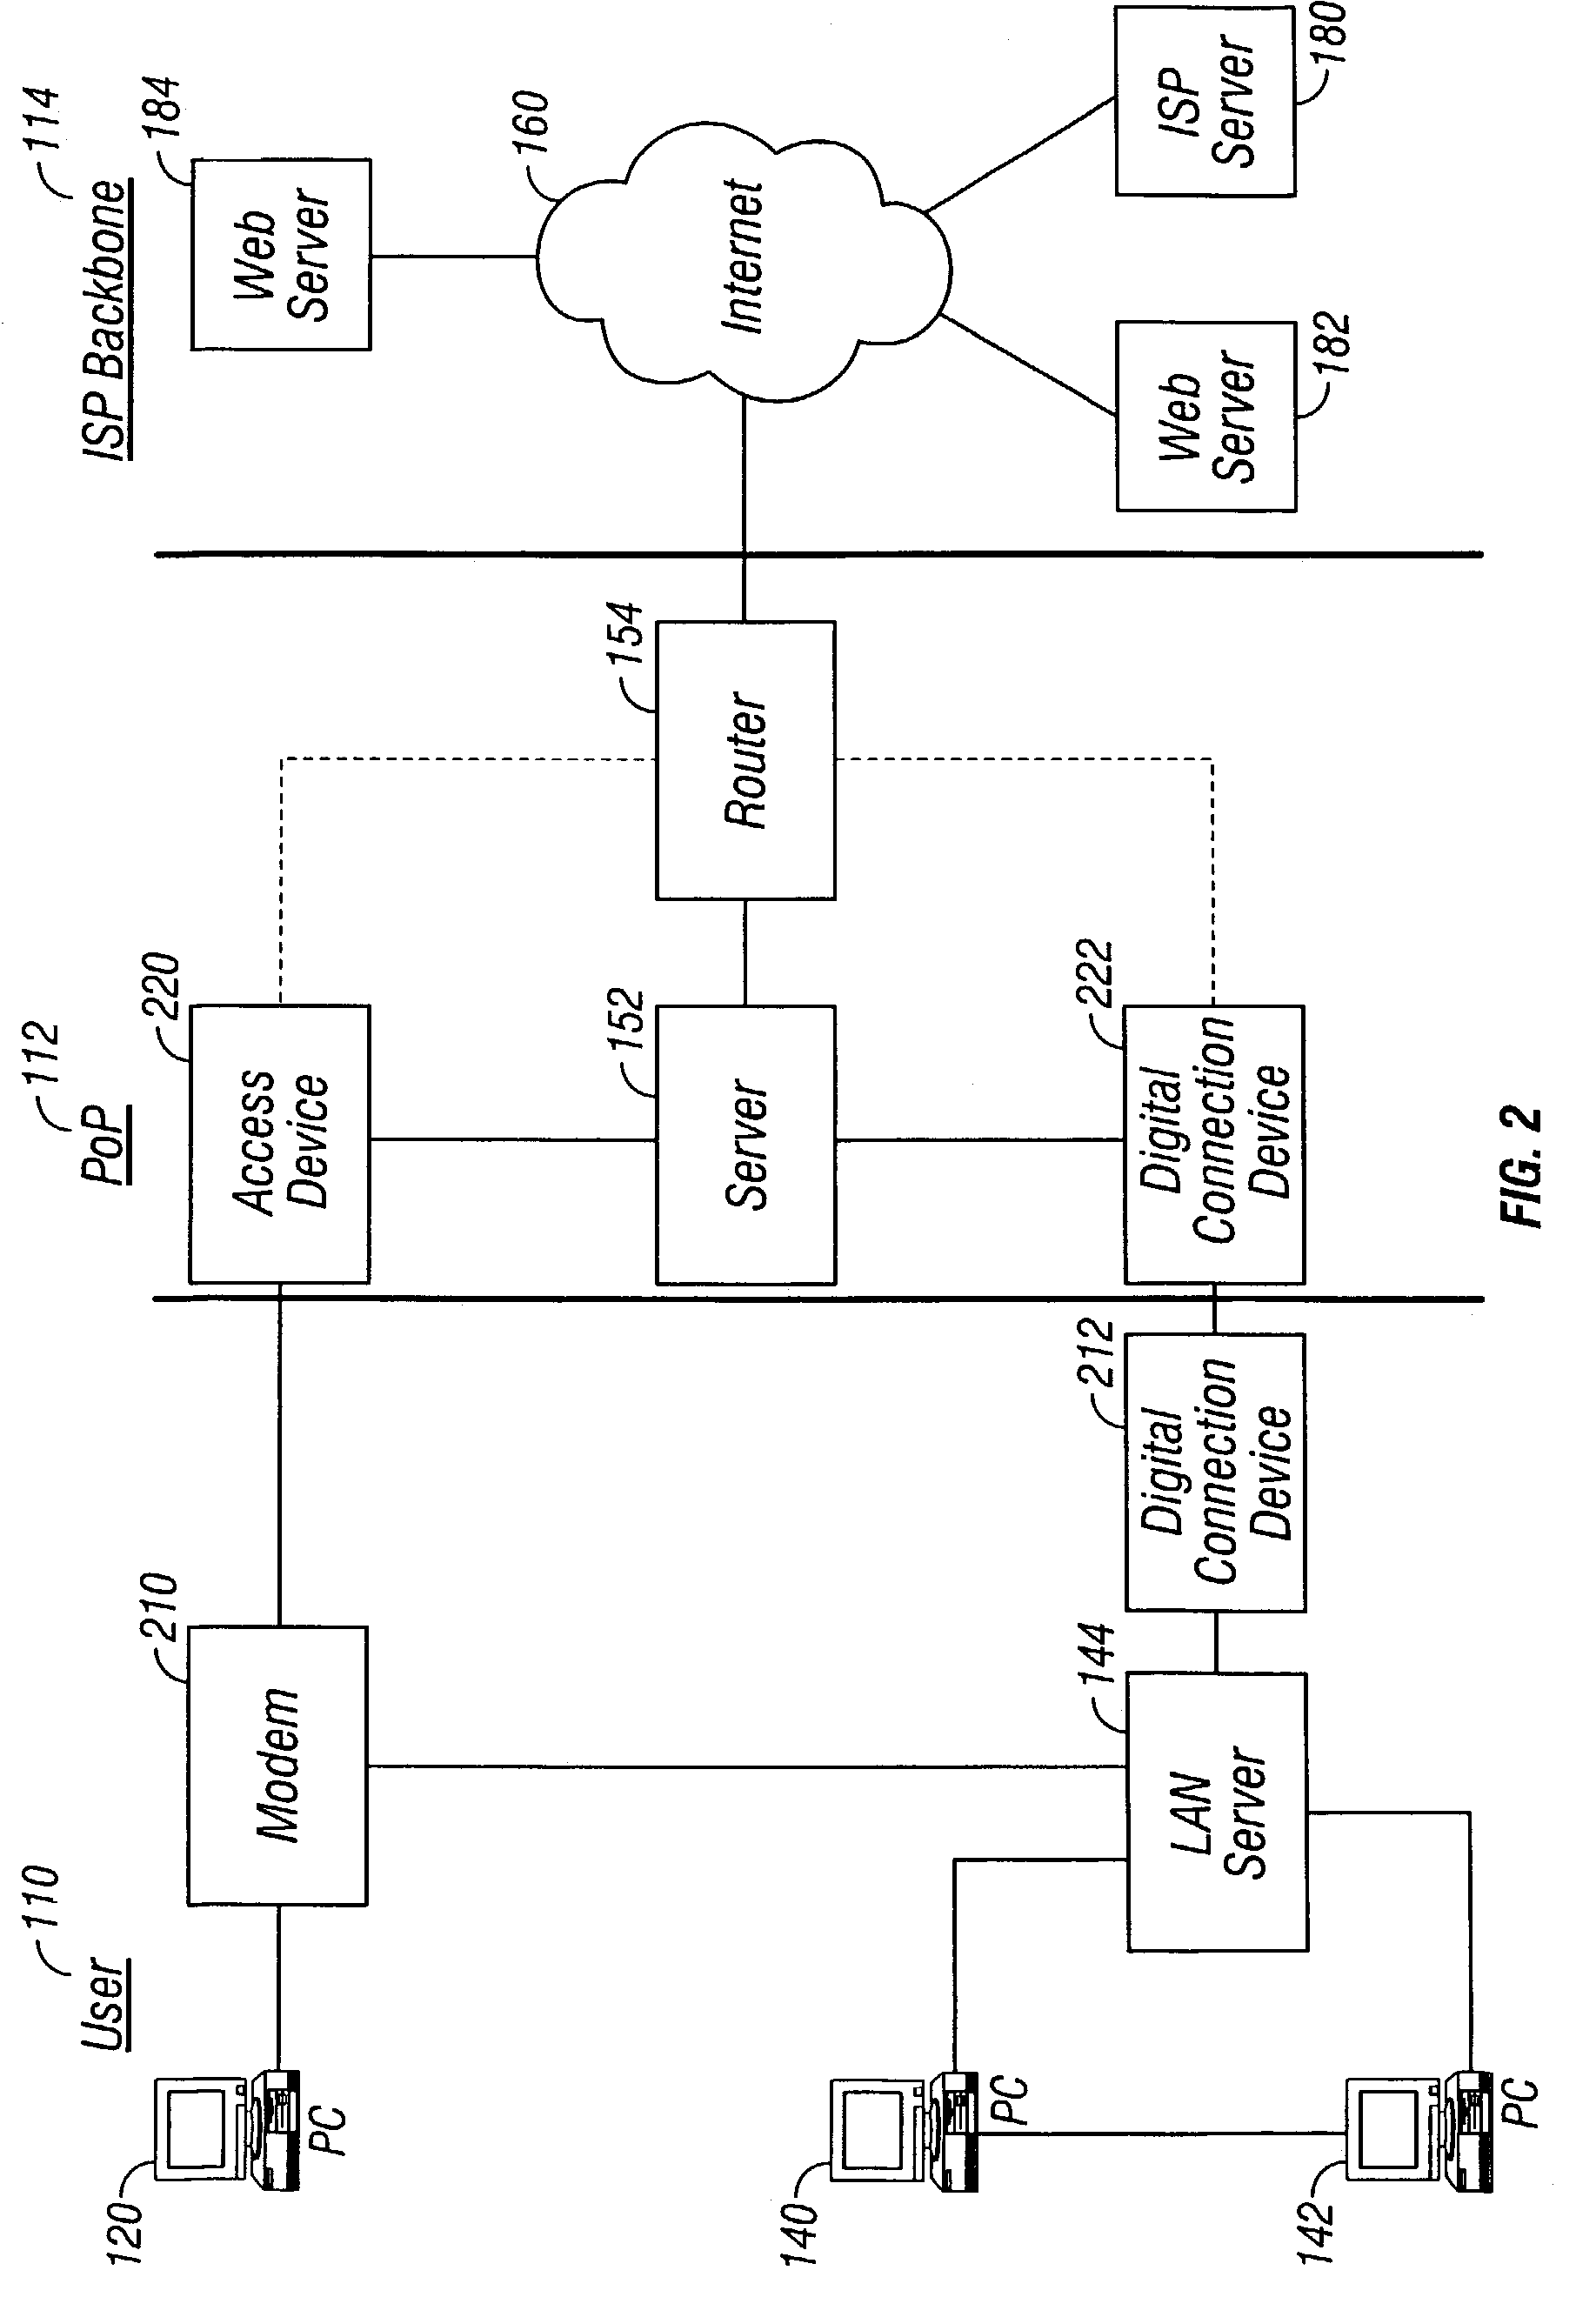 System and method for increasing the effective bandwidth of a communications network